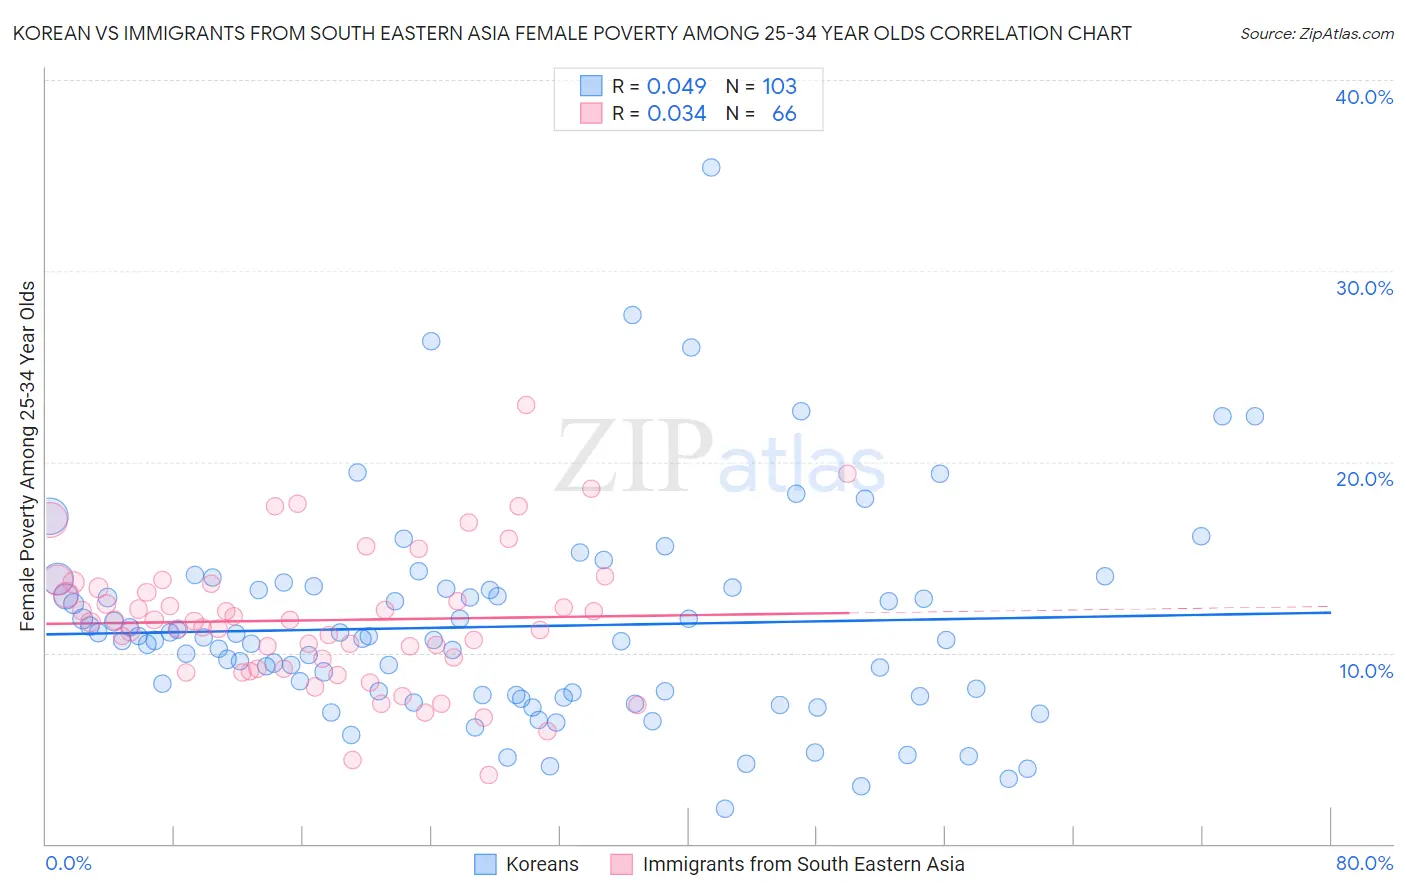 Korean vs Immigrants from South Eastern Asia Female Poverty Among 25-34 Year Olds